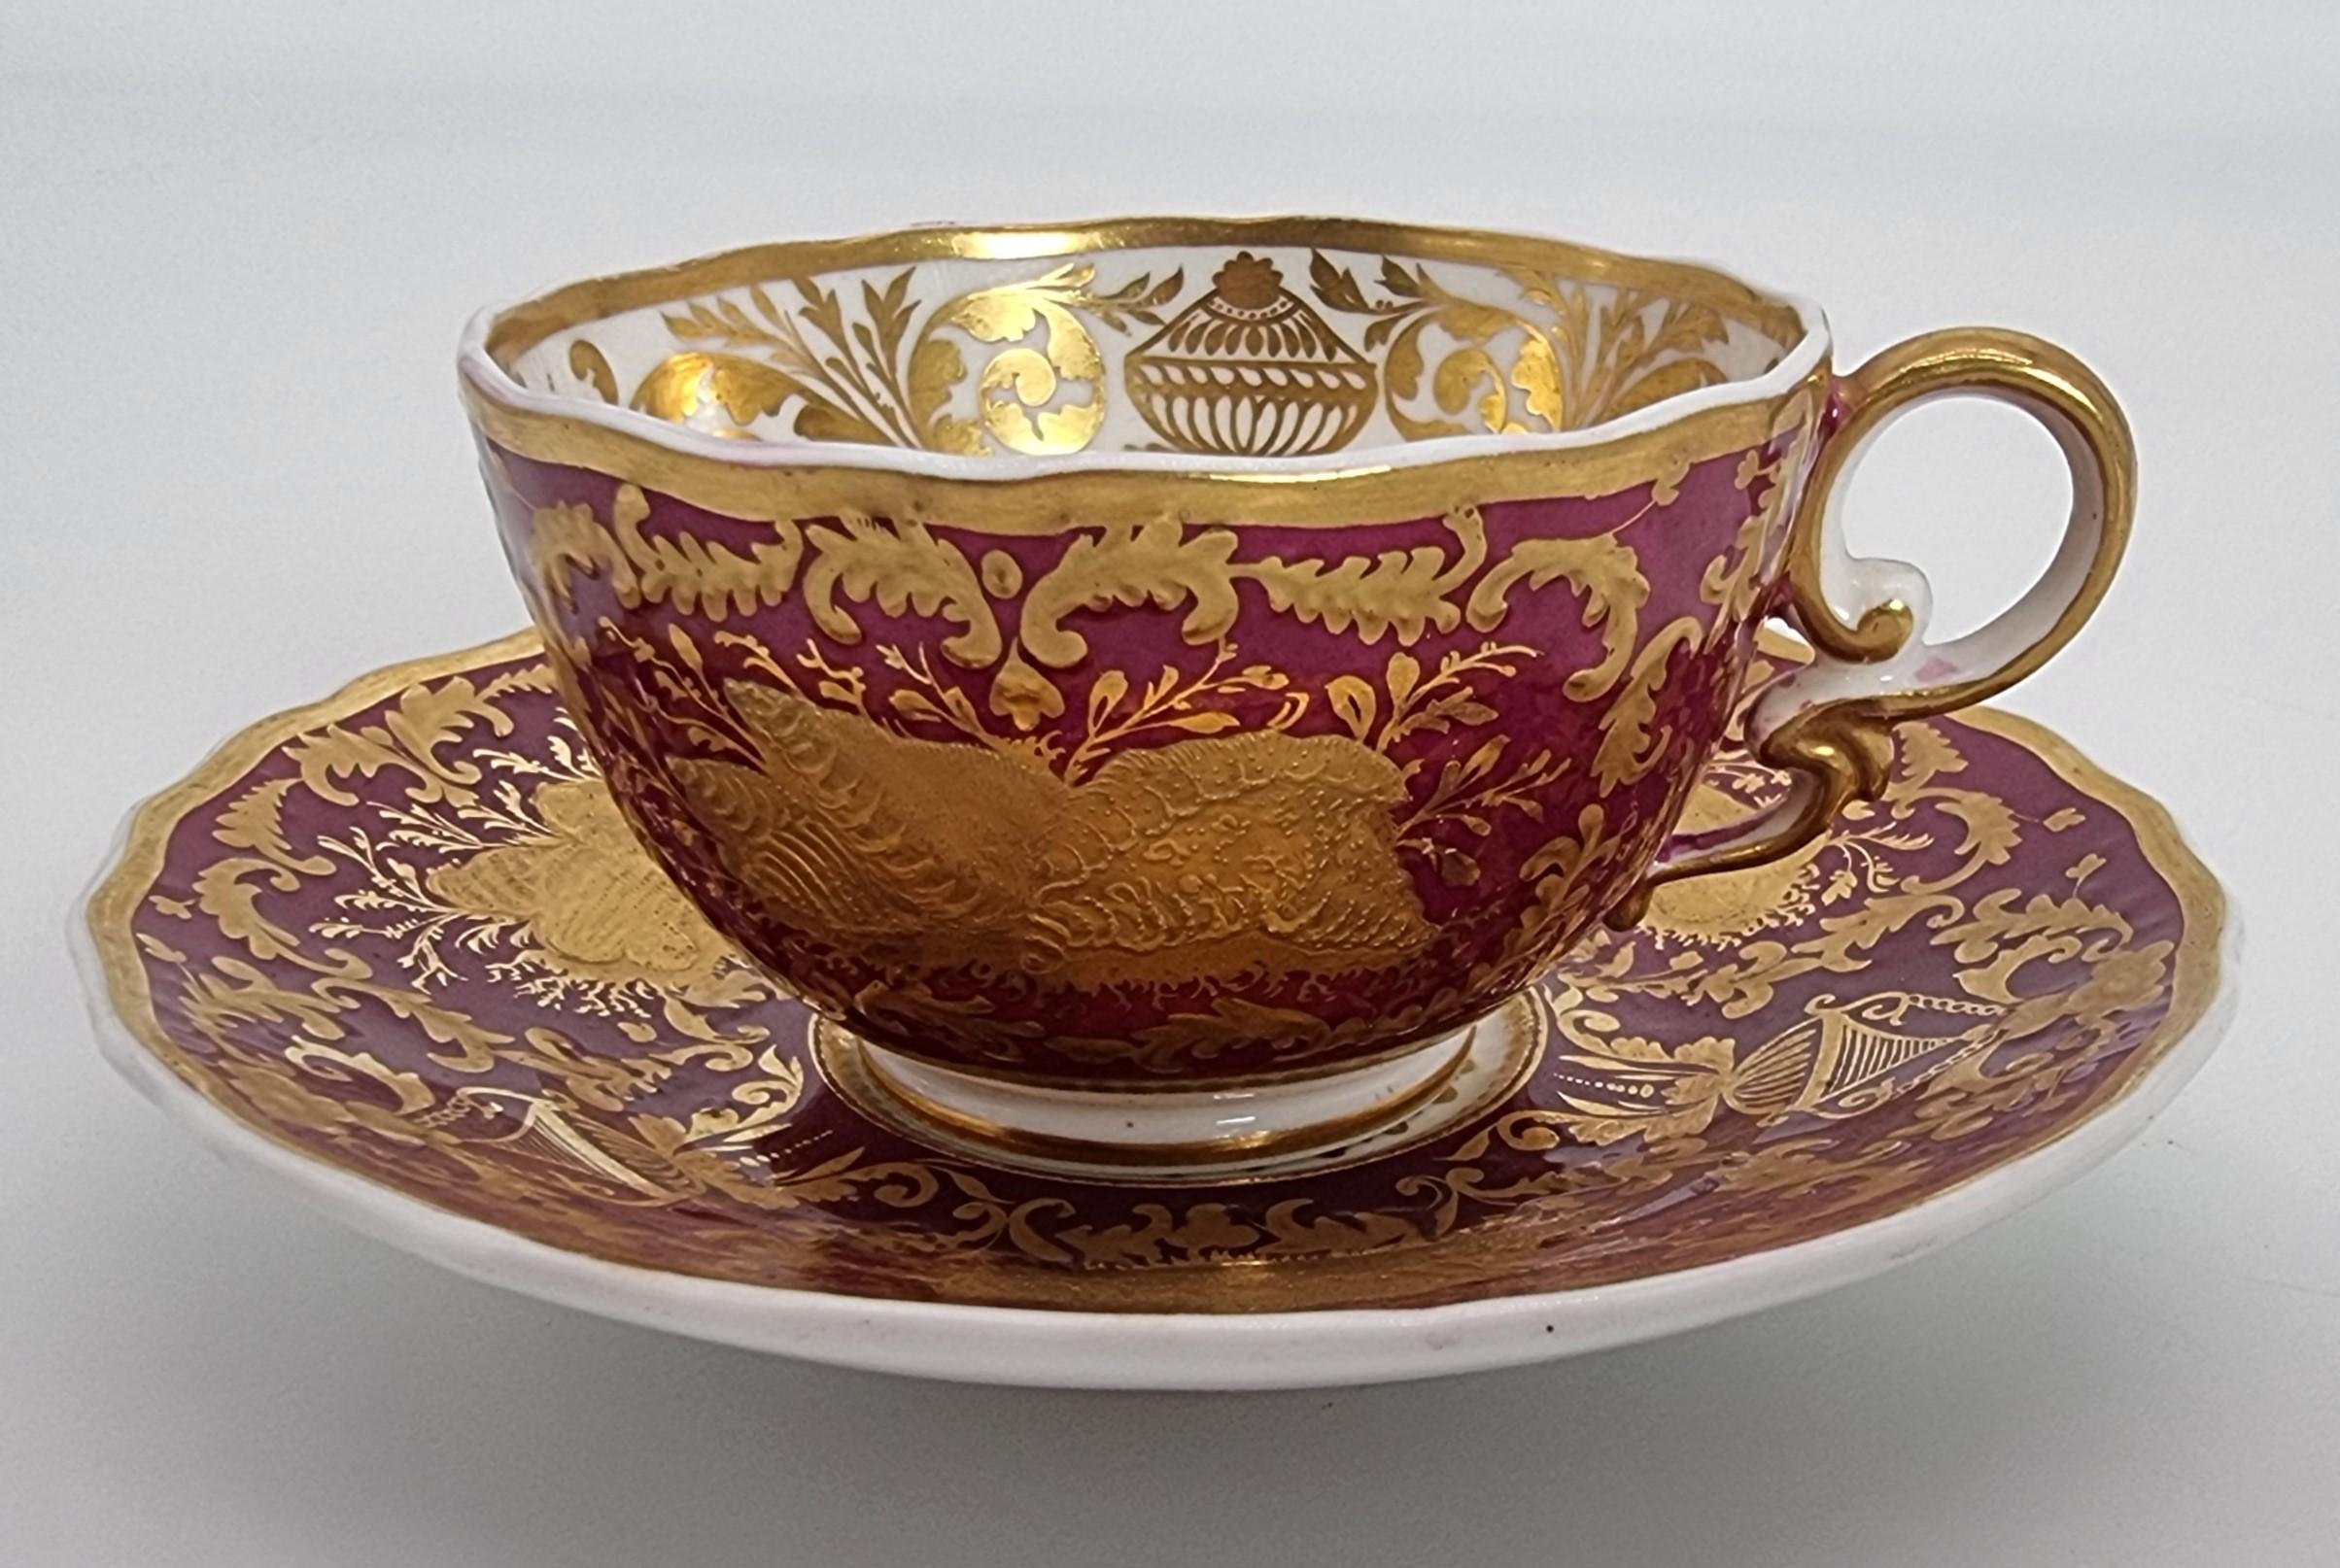 An exquisite and rare early 19t C Spode cabinet cup and saucer circa 1830 For Sale 10